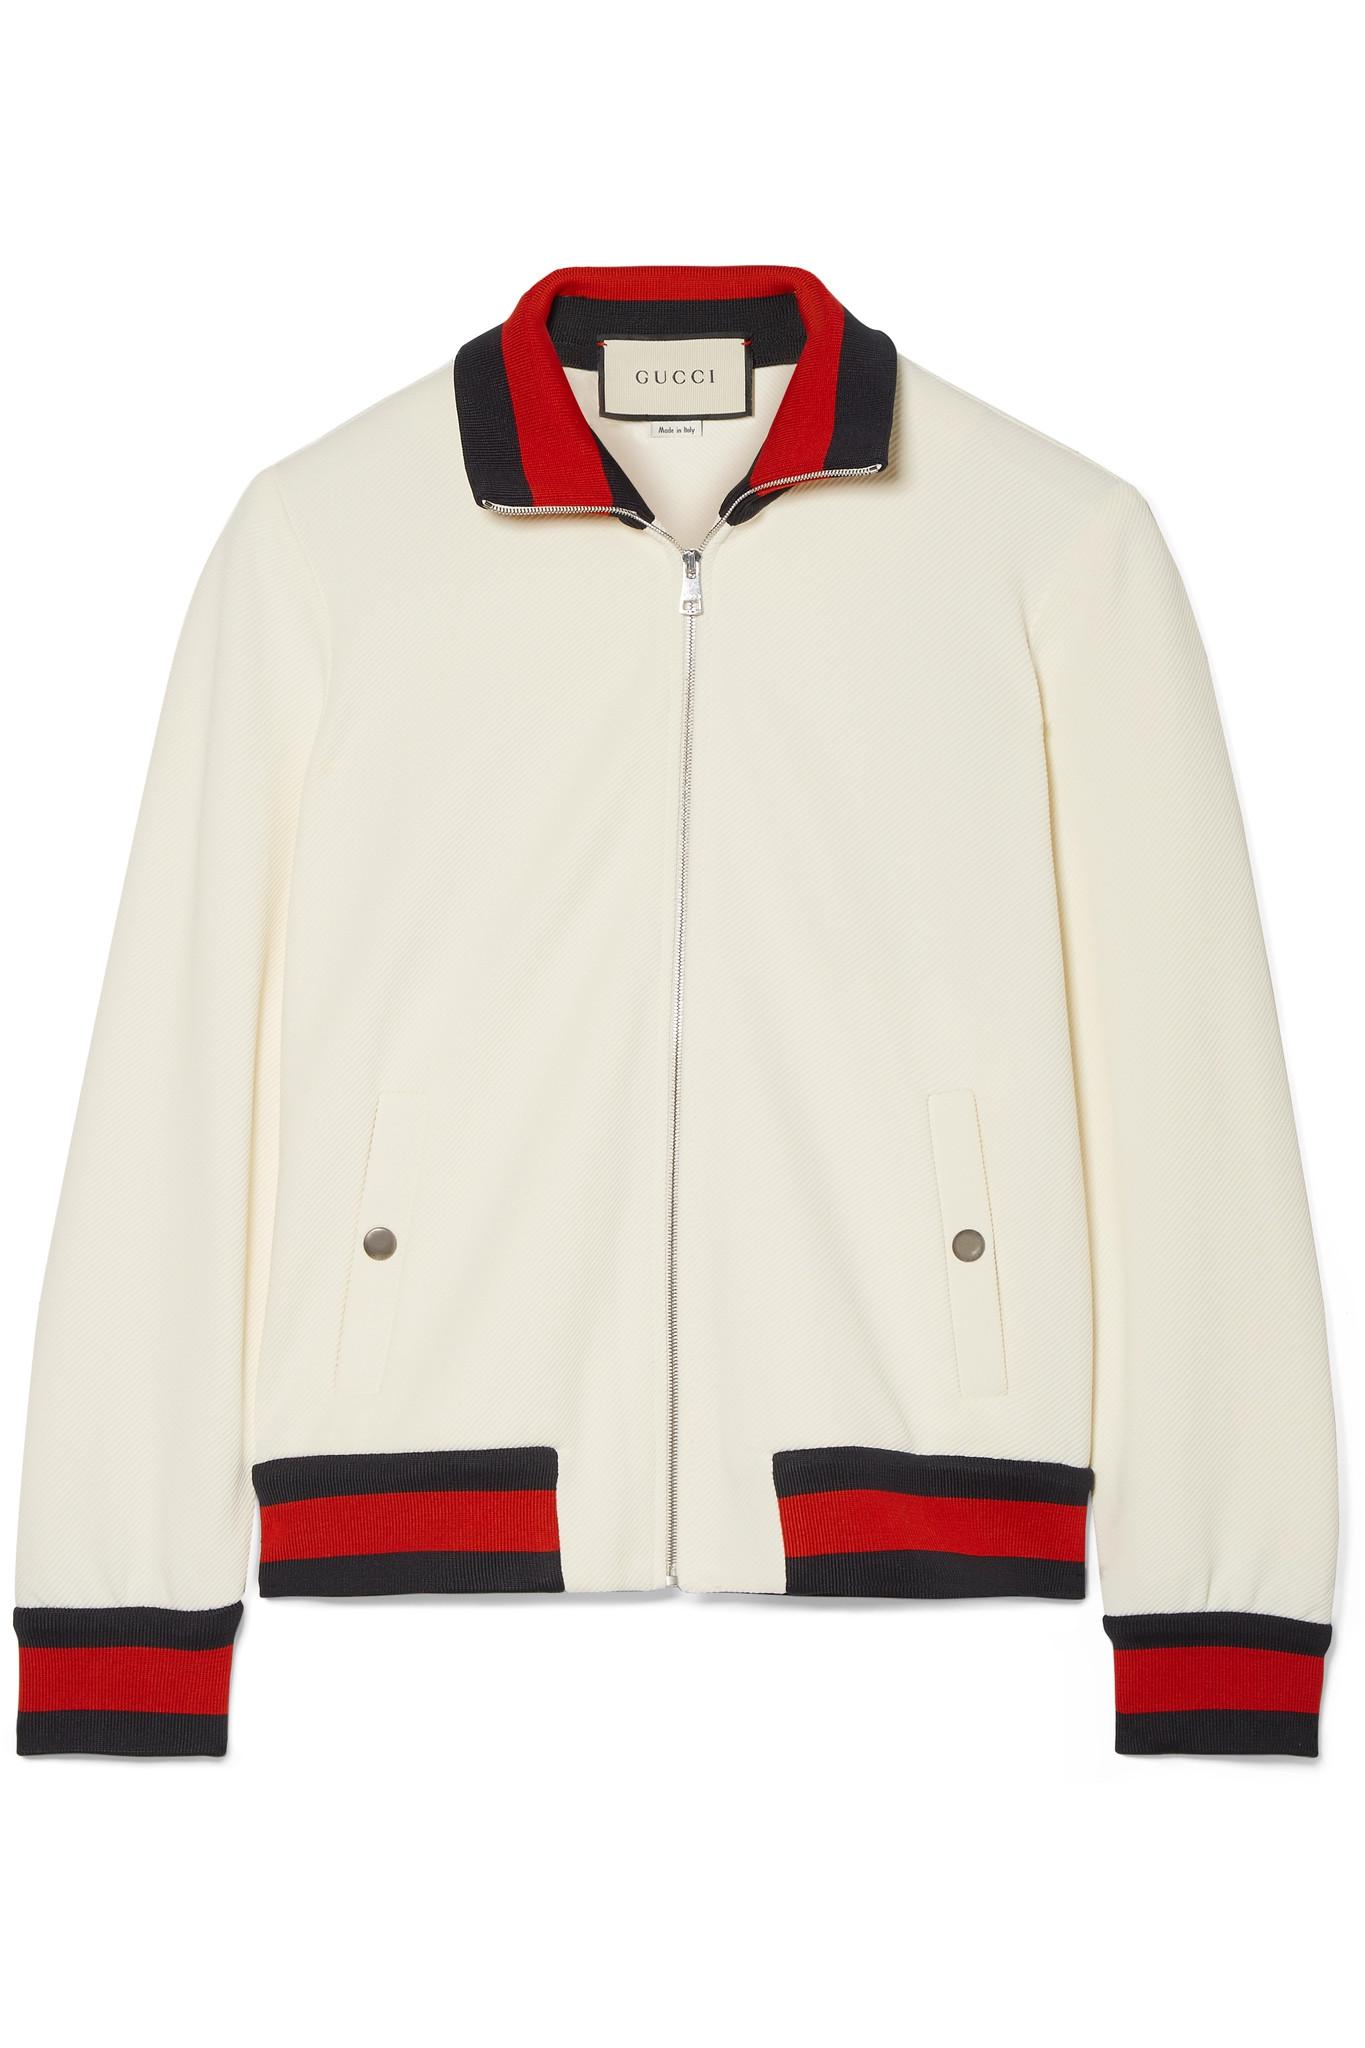 Gucci Twill Bomber Jacket in White Lyst